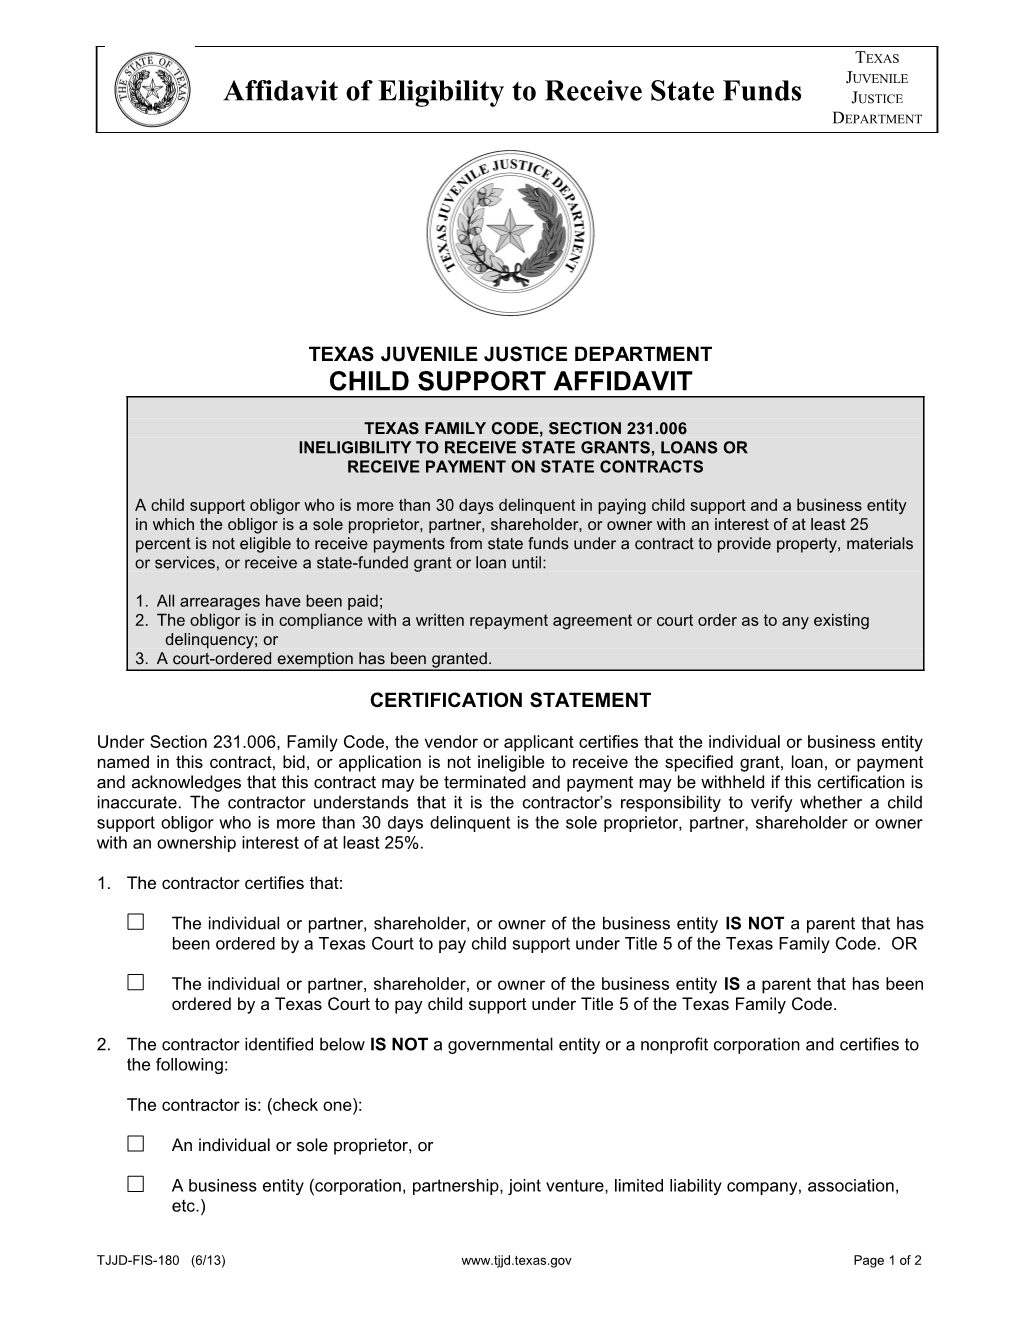 TJPC-FIS-60-04 Affidavit of Eligibility to Receive State Funds